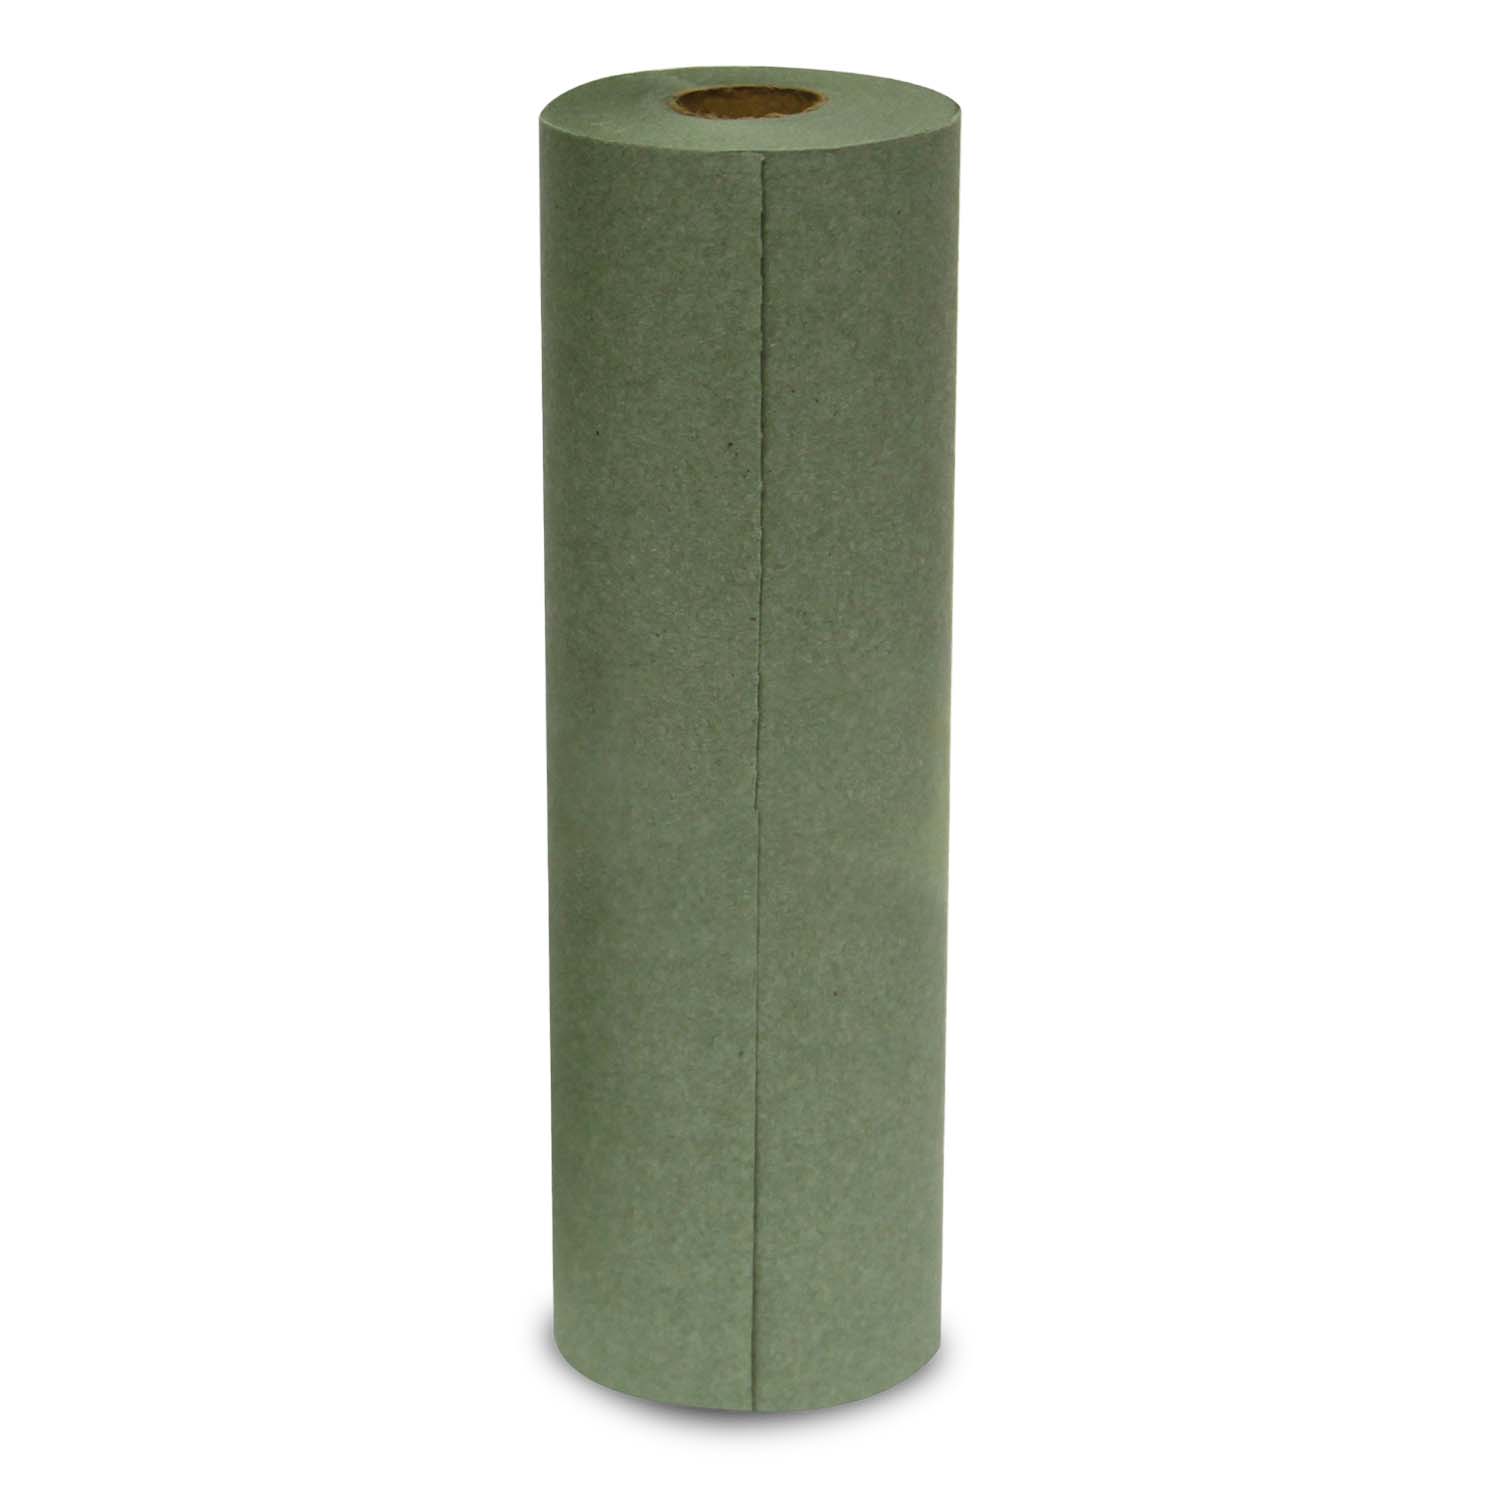 Quality Green Masking Paper 750' – Lee Supply Inc.